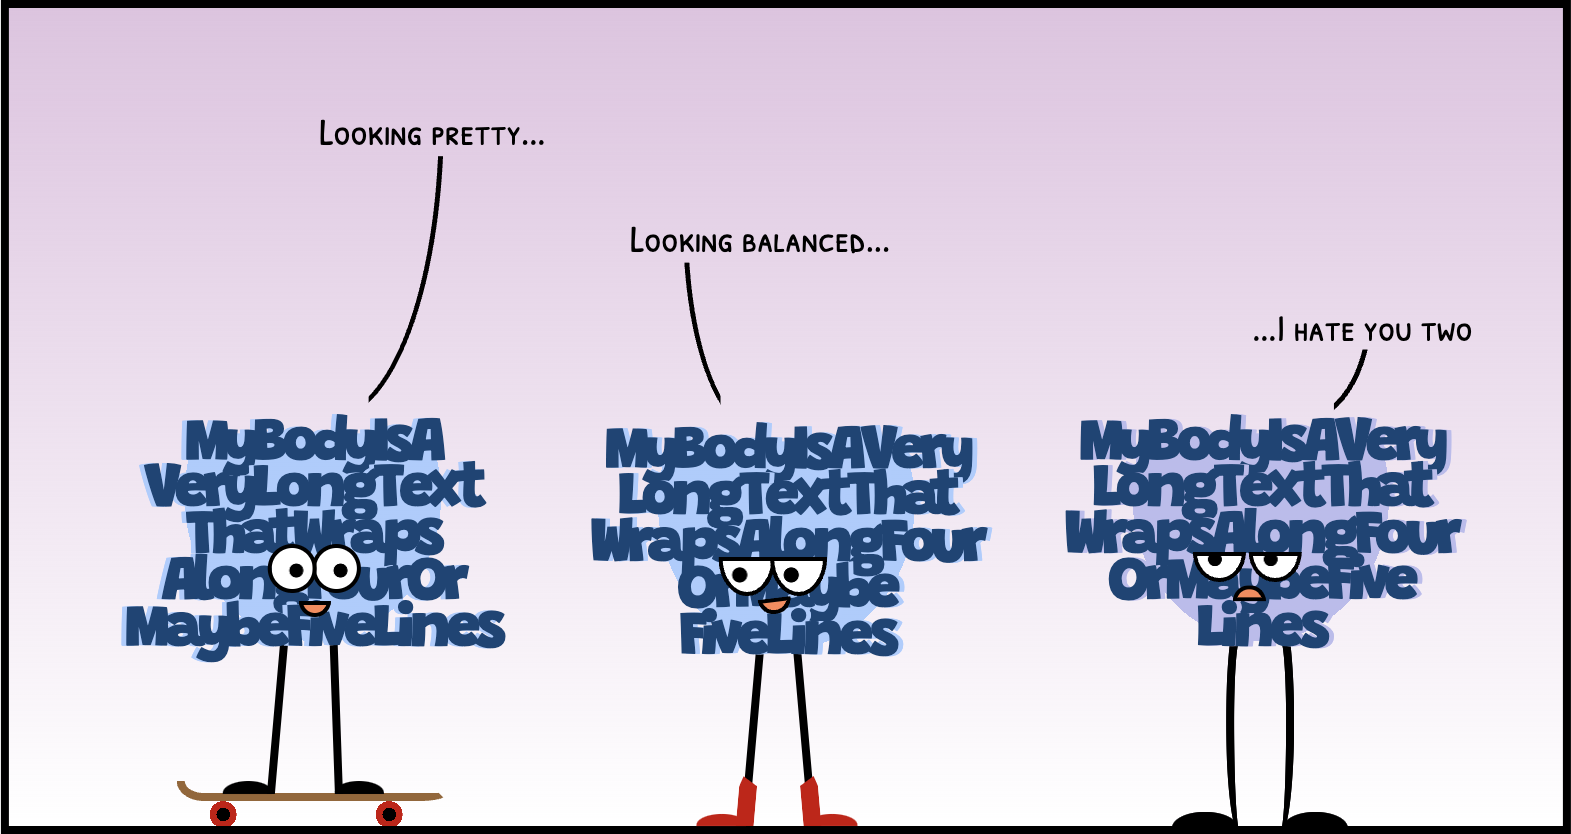 cartoon with three characters whose body is the text 'my body is a very long text that wraps along four or maybe five lines' squeezed together and have stick legs. The first character is on a skateboard, it has the body text well balanced, and is saying 'looking prety...' to the second character. The second character is wearing boots, its body text has two words in the last line, and replies 'looking balanced' to the first character. The last character looks sad/tired, its body text is grayer and the last line only contains an unbalanced one word. It says looking at the other characters 'I hate you two...'